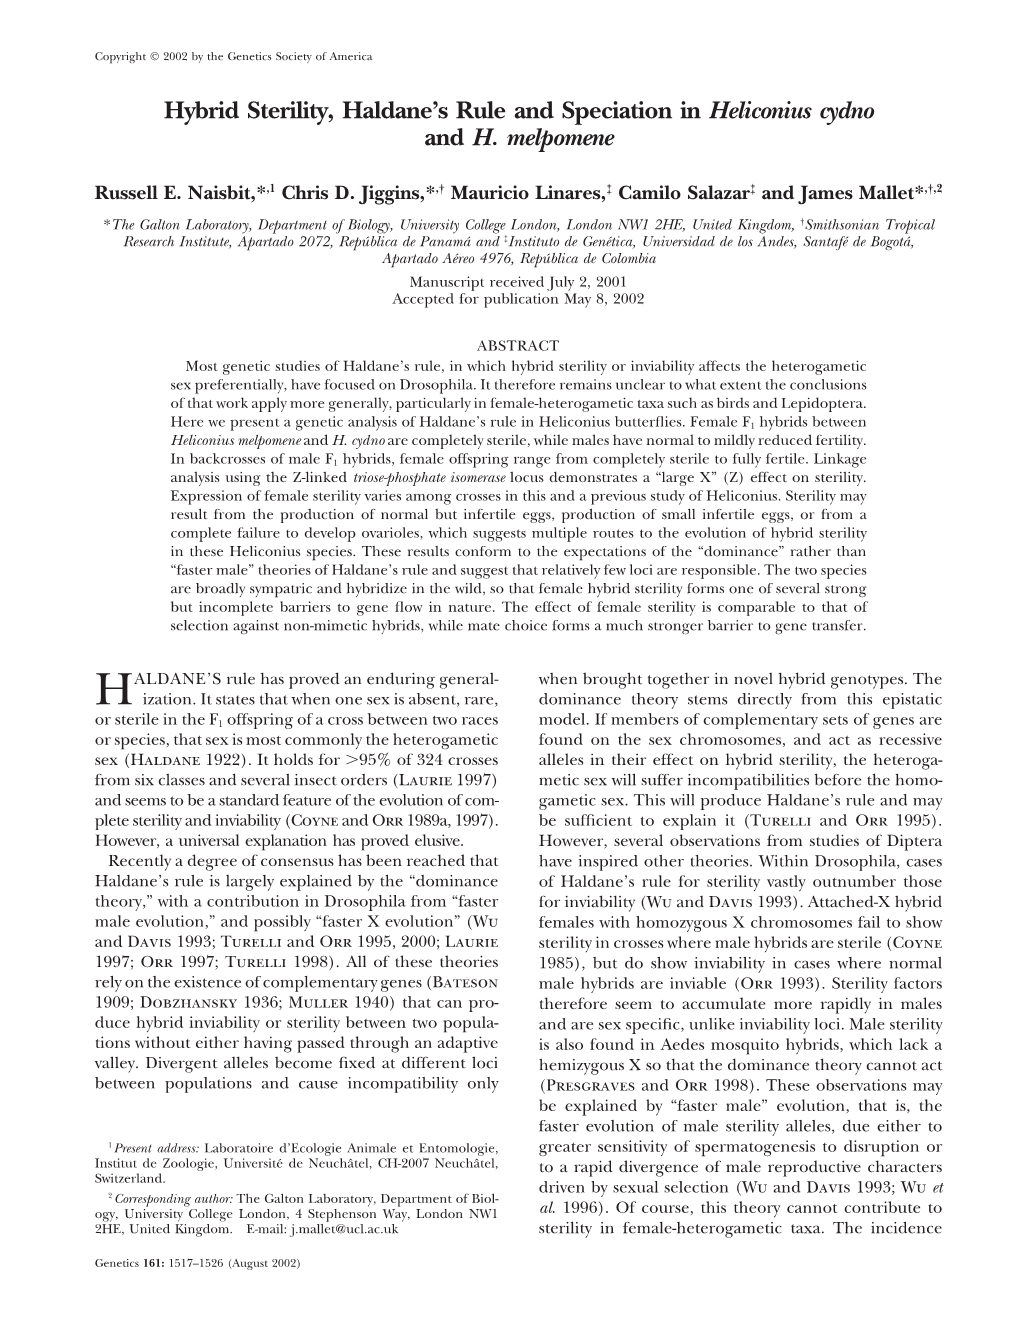 Hybrid Sterility, Haldane's Rule and Speciation in Heliconius Cydno And